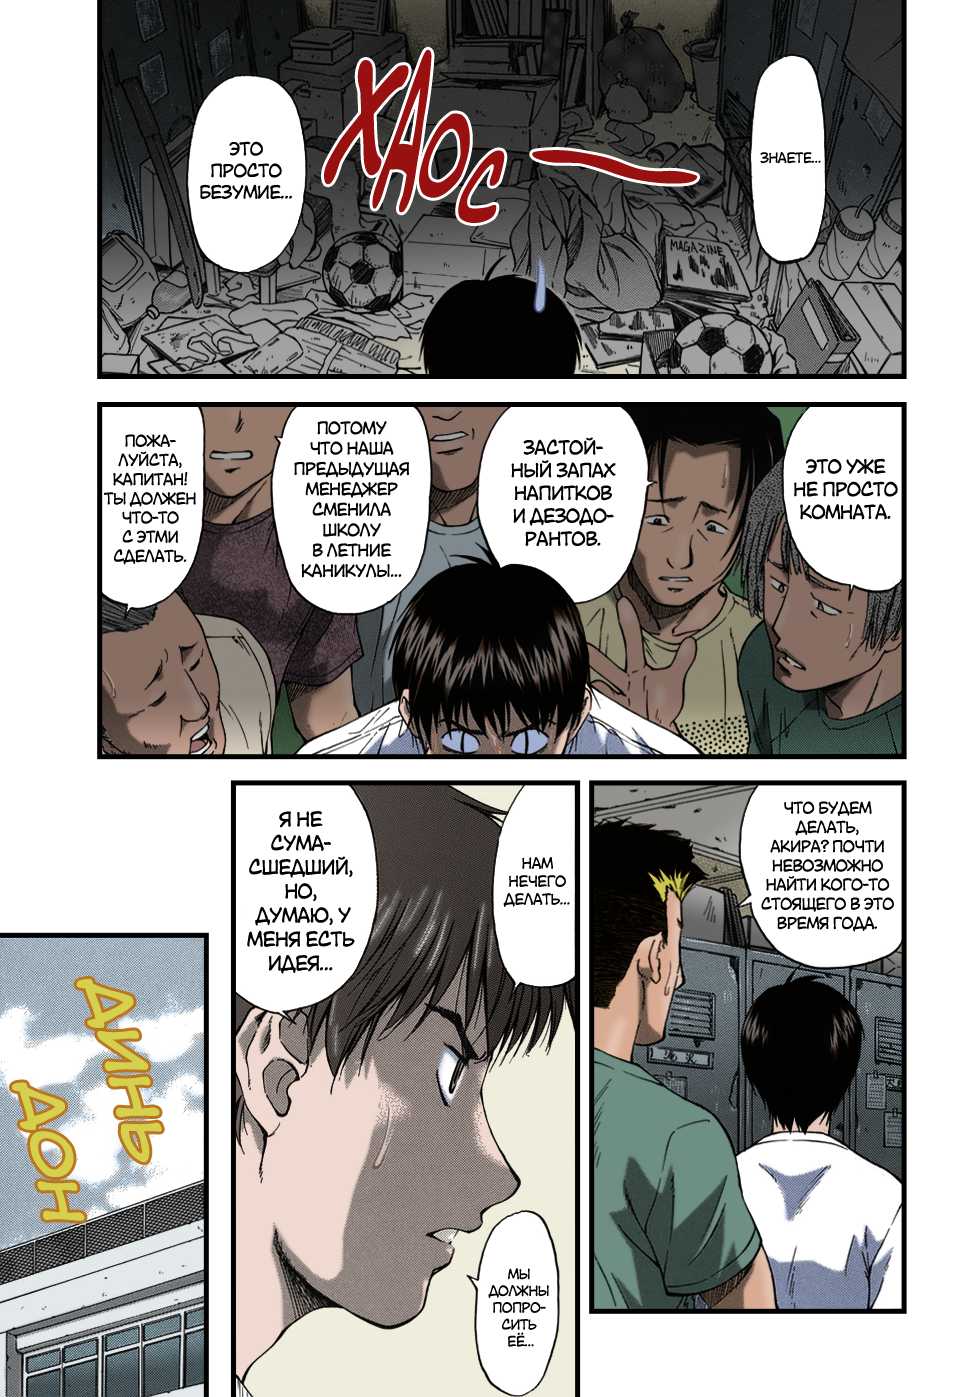 [Nagare Ippon] Offside Girl Ch. 1-5 [Russian] [Colorized] [Decensored] [WIP] - Page 8